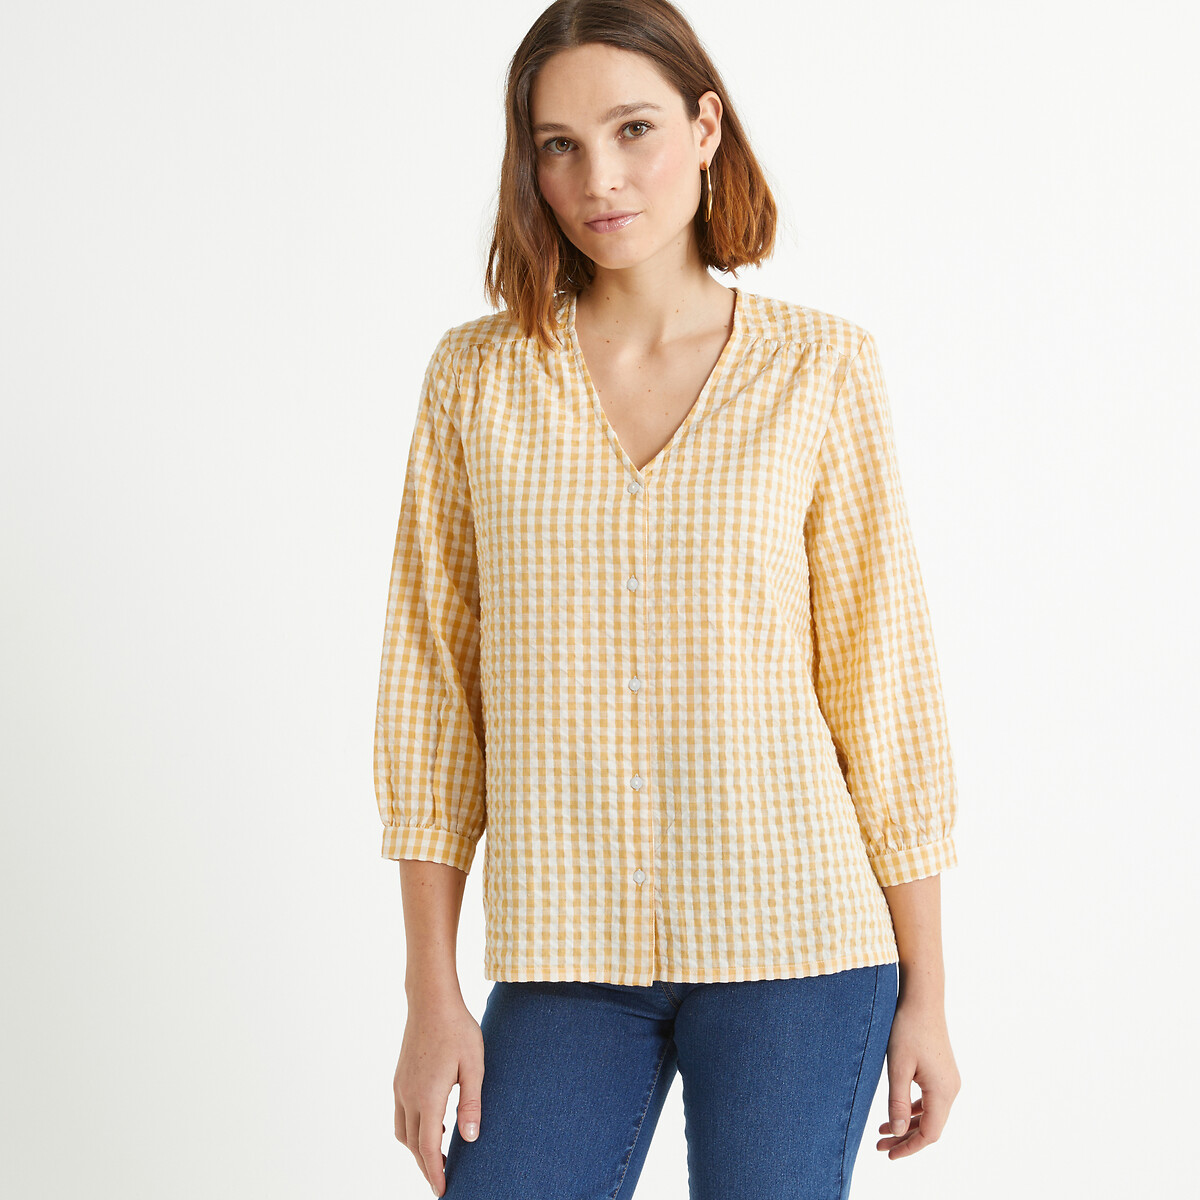 Checked Cotton Seersucker Blouse with V-Neck and 3/4 Length Sleeves